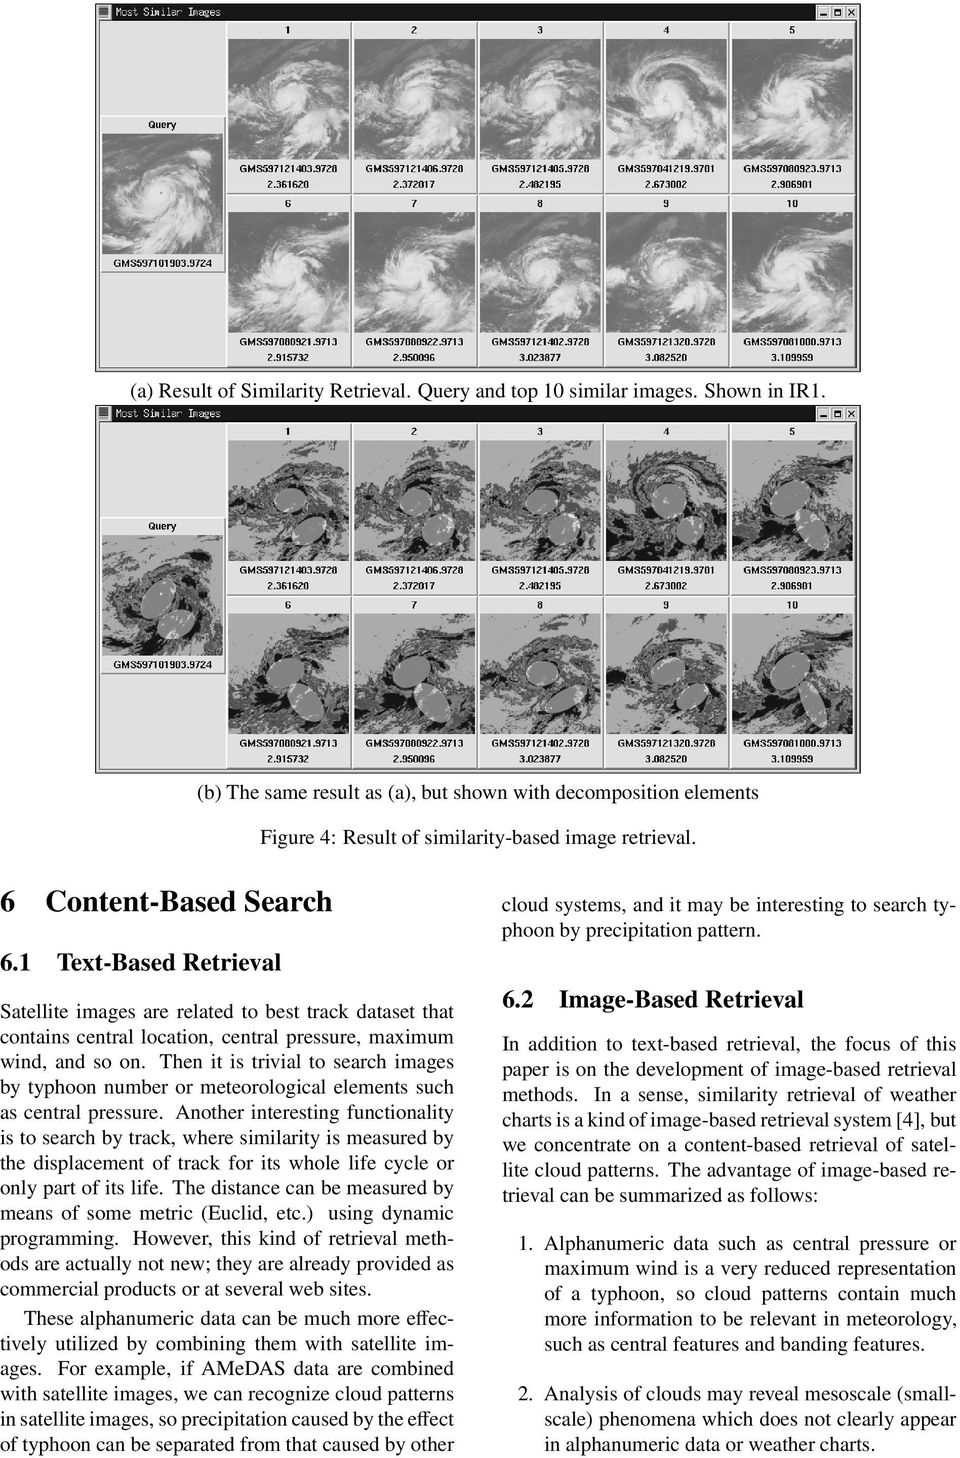 1 Text-Based Retrieval Satellite images are related to best track dataset that contains central location, central pressure, maximum wind, and so on.